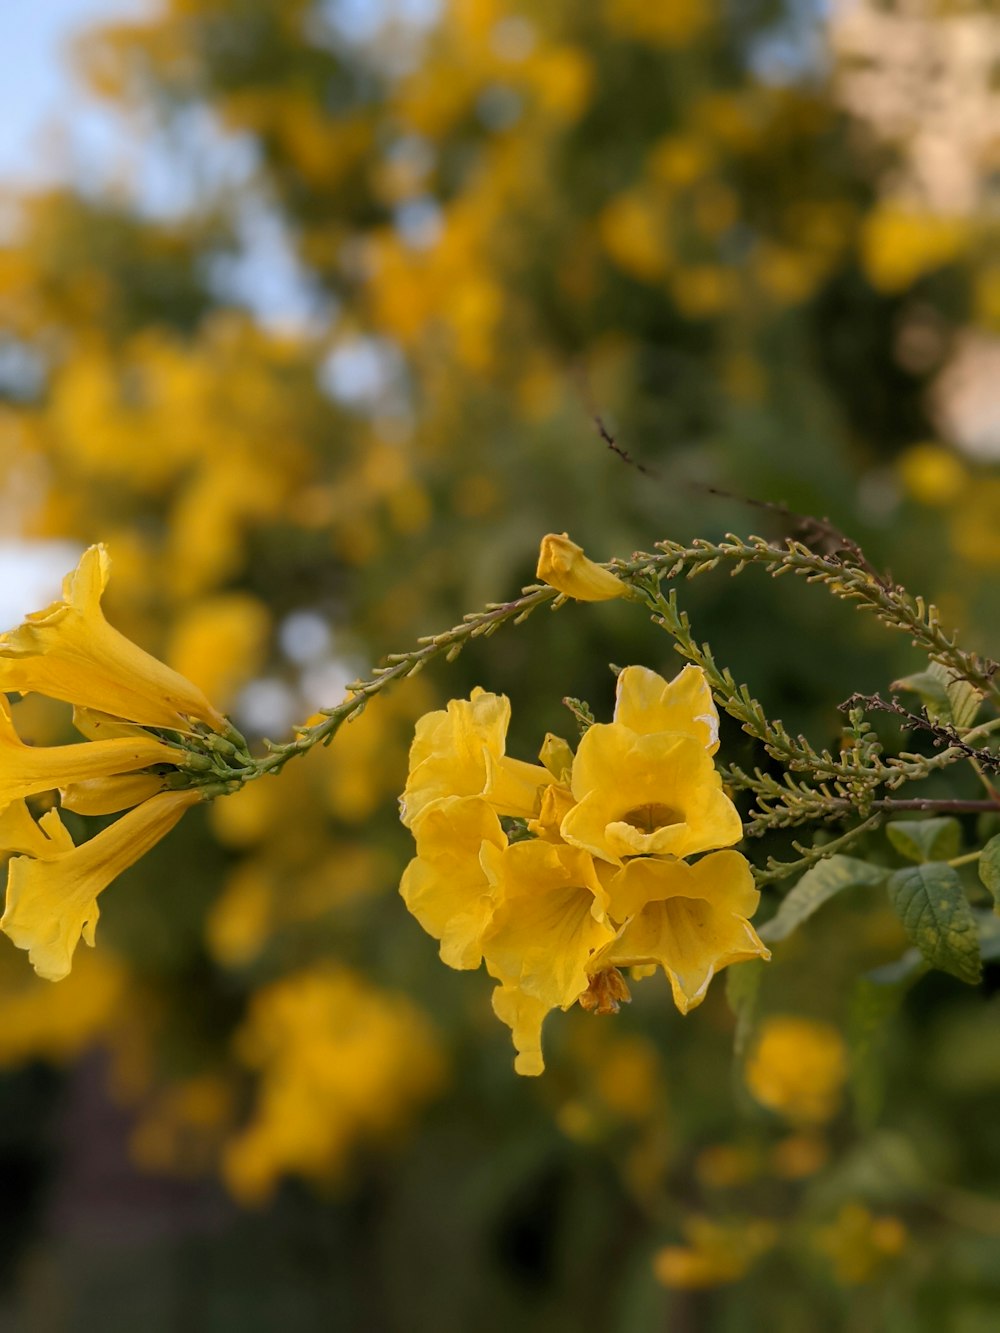 yellow flower on brown tree branch during daytime